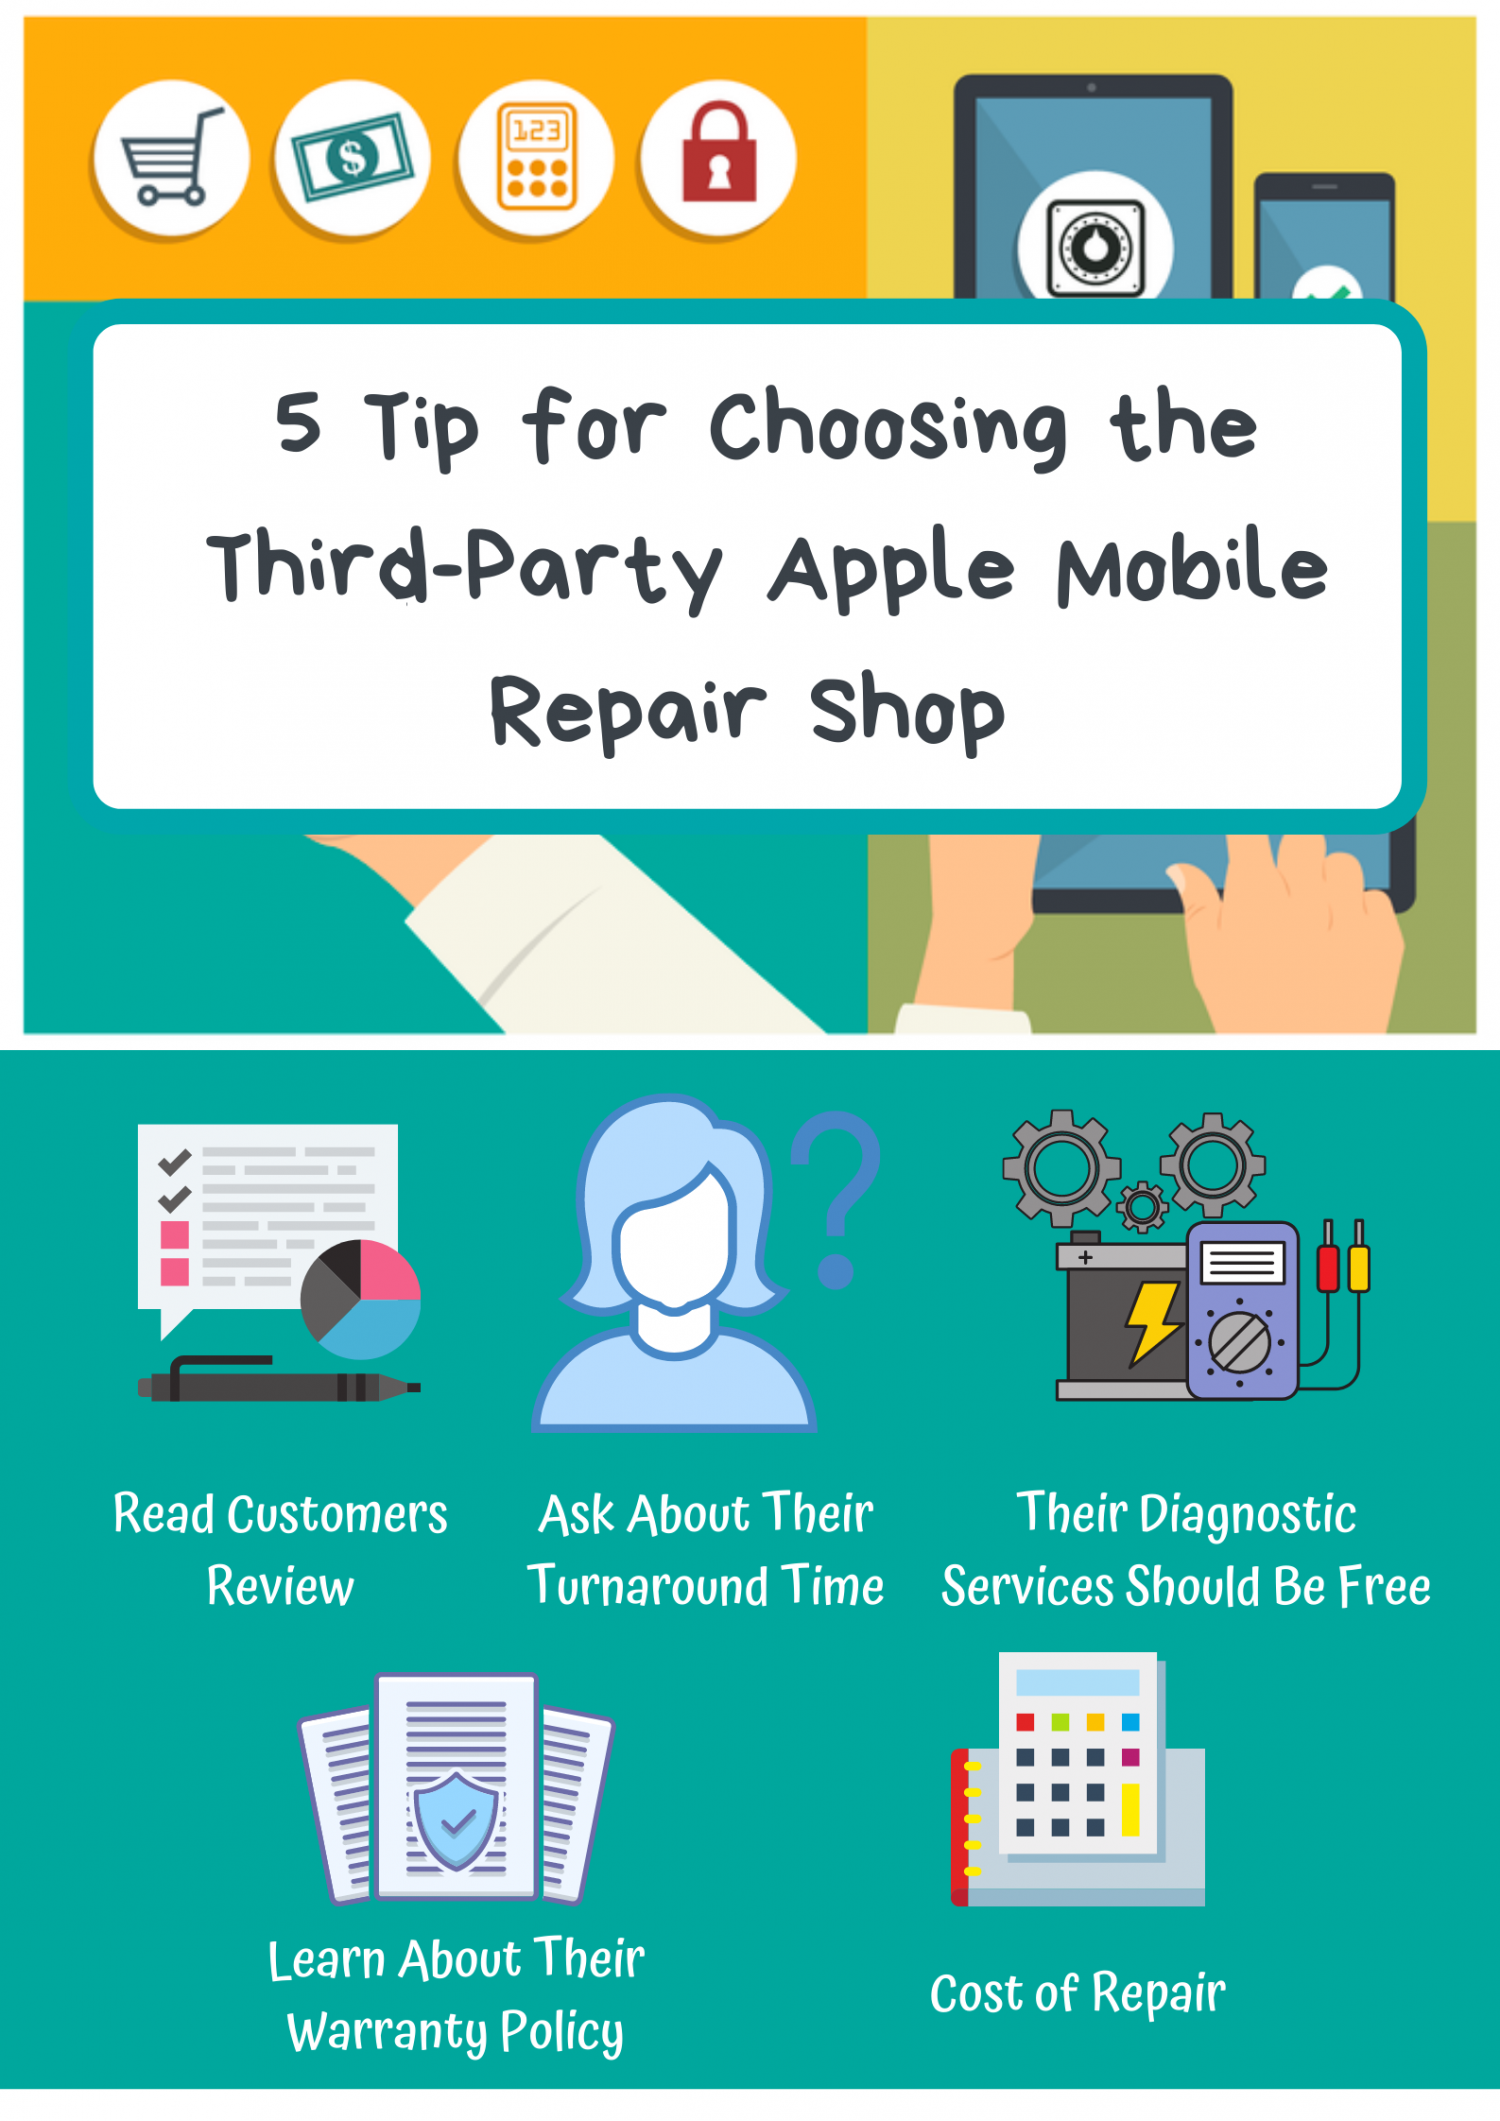 5 Tip for Choosing the Third-Party Apple Mobile Repair Shop  Infographic